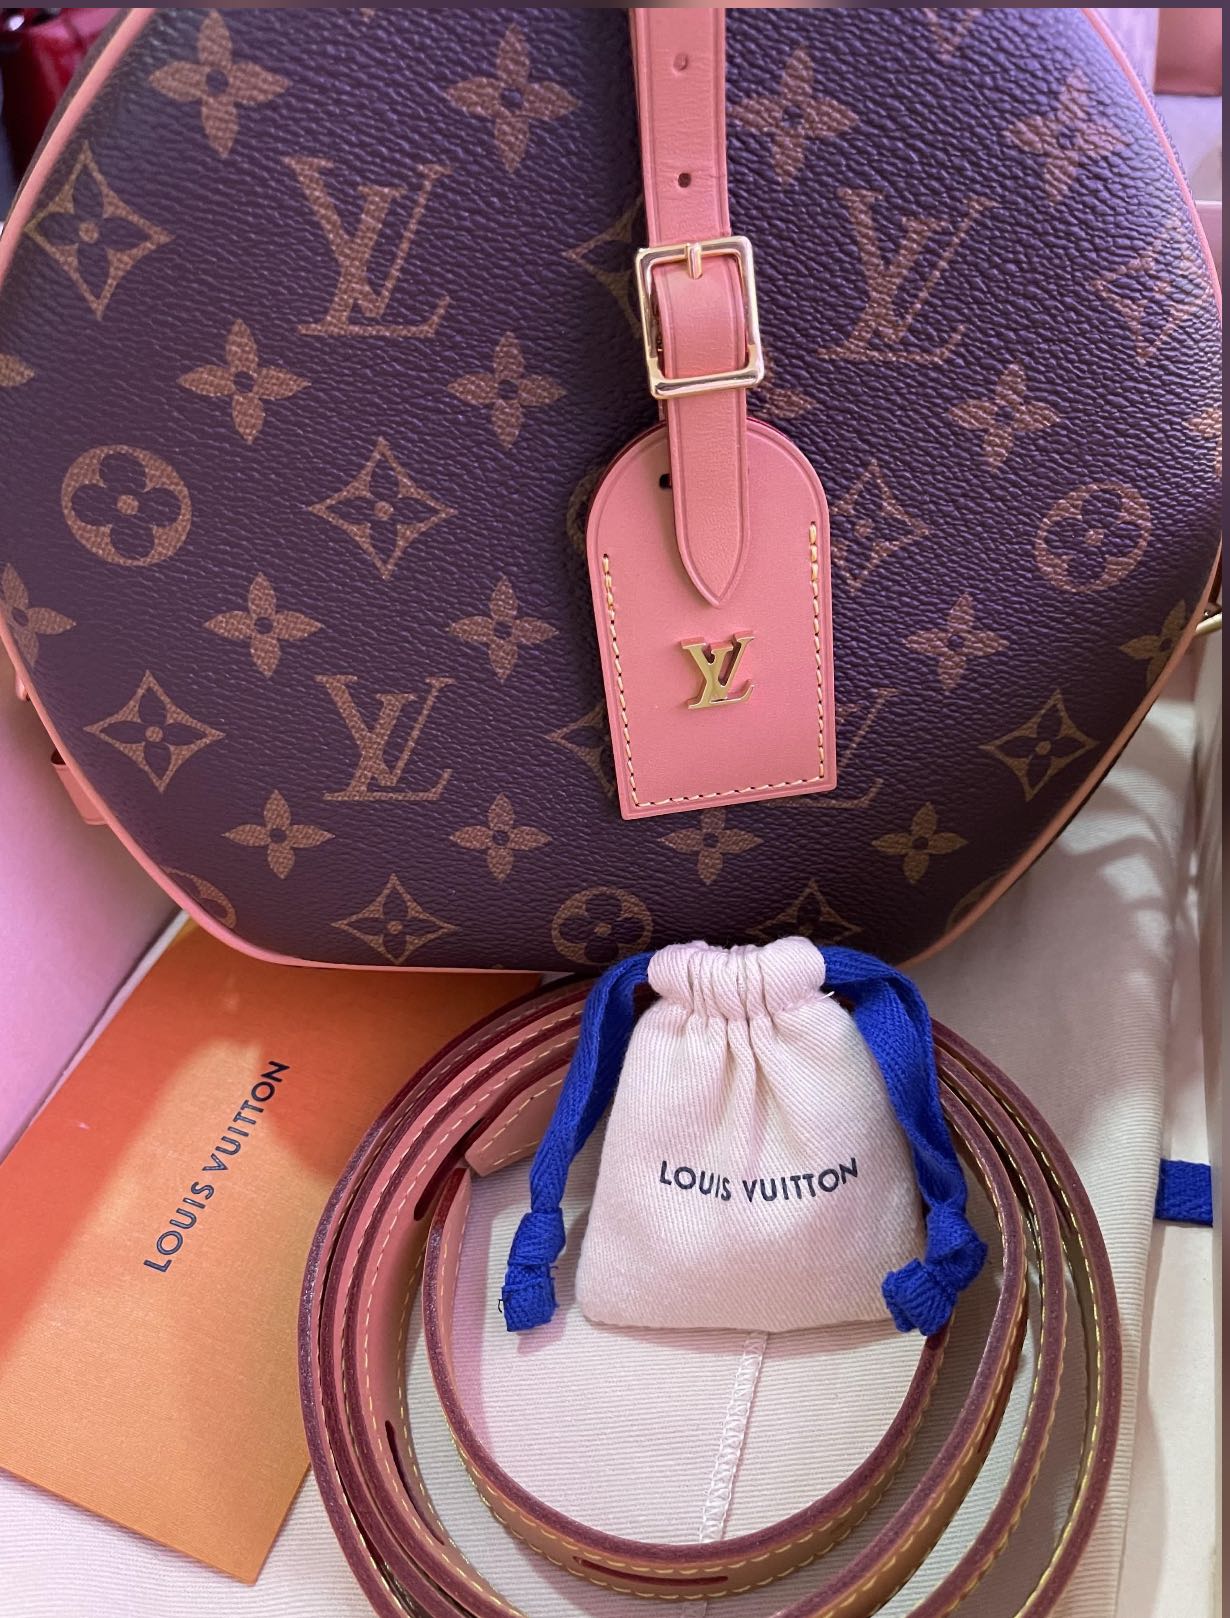 Is this rep call-out able? LV BOITE CHAPEAU SOUPLE MM from Ming :  r/RepladiesDesigner